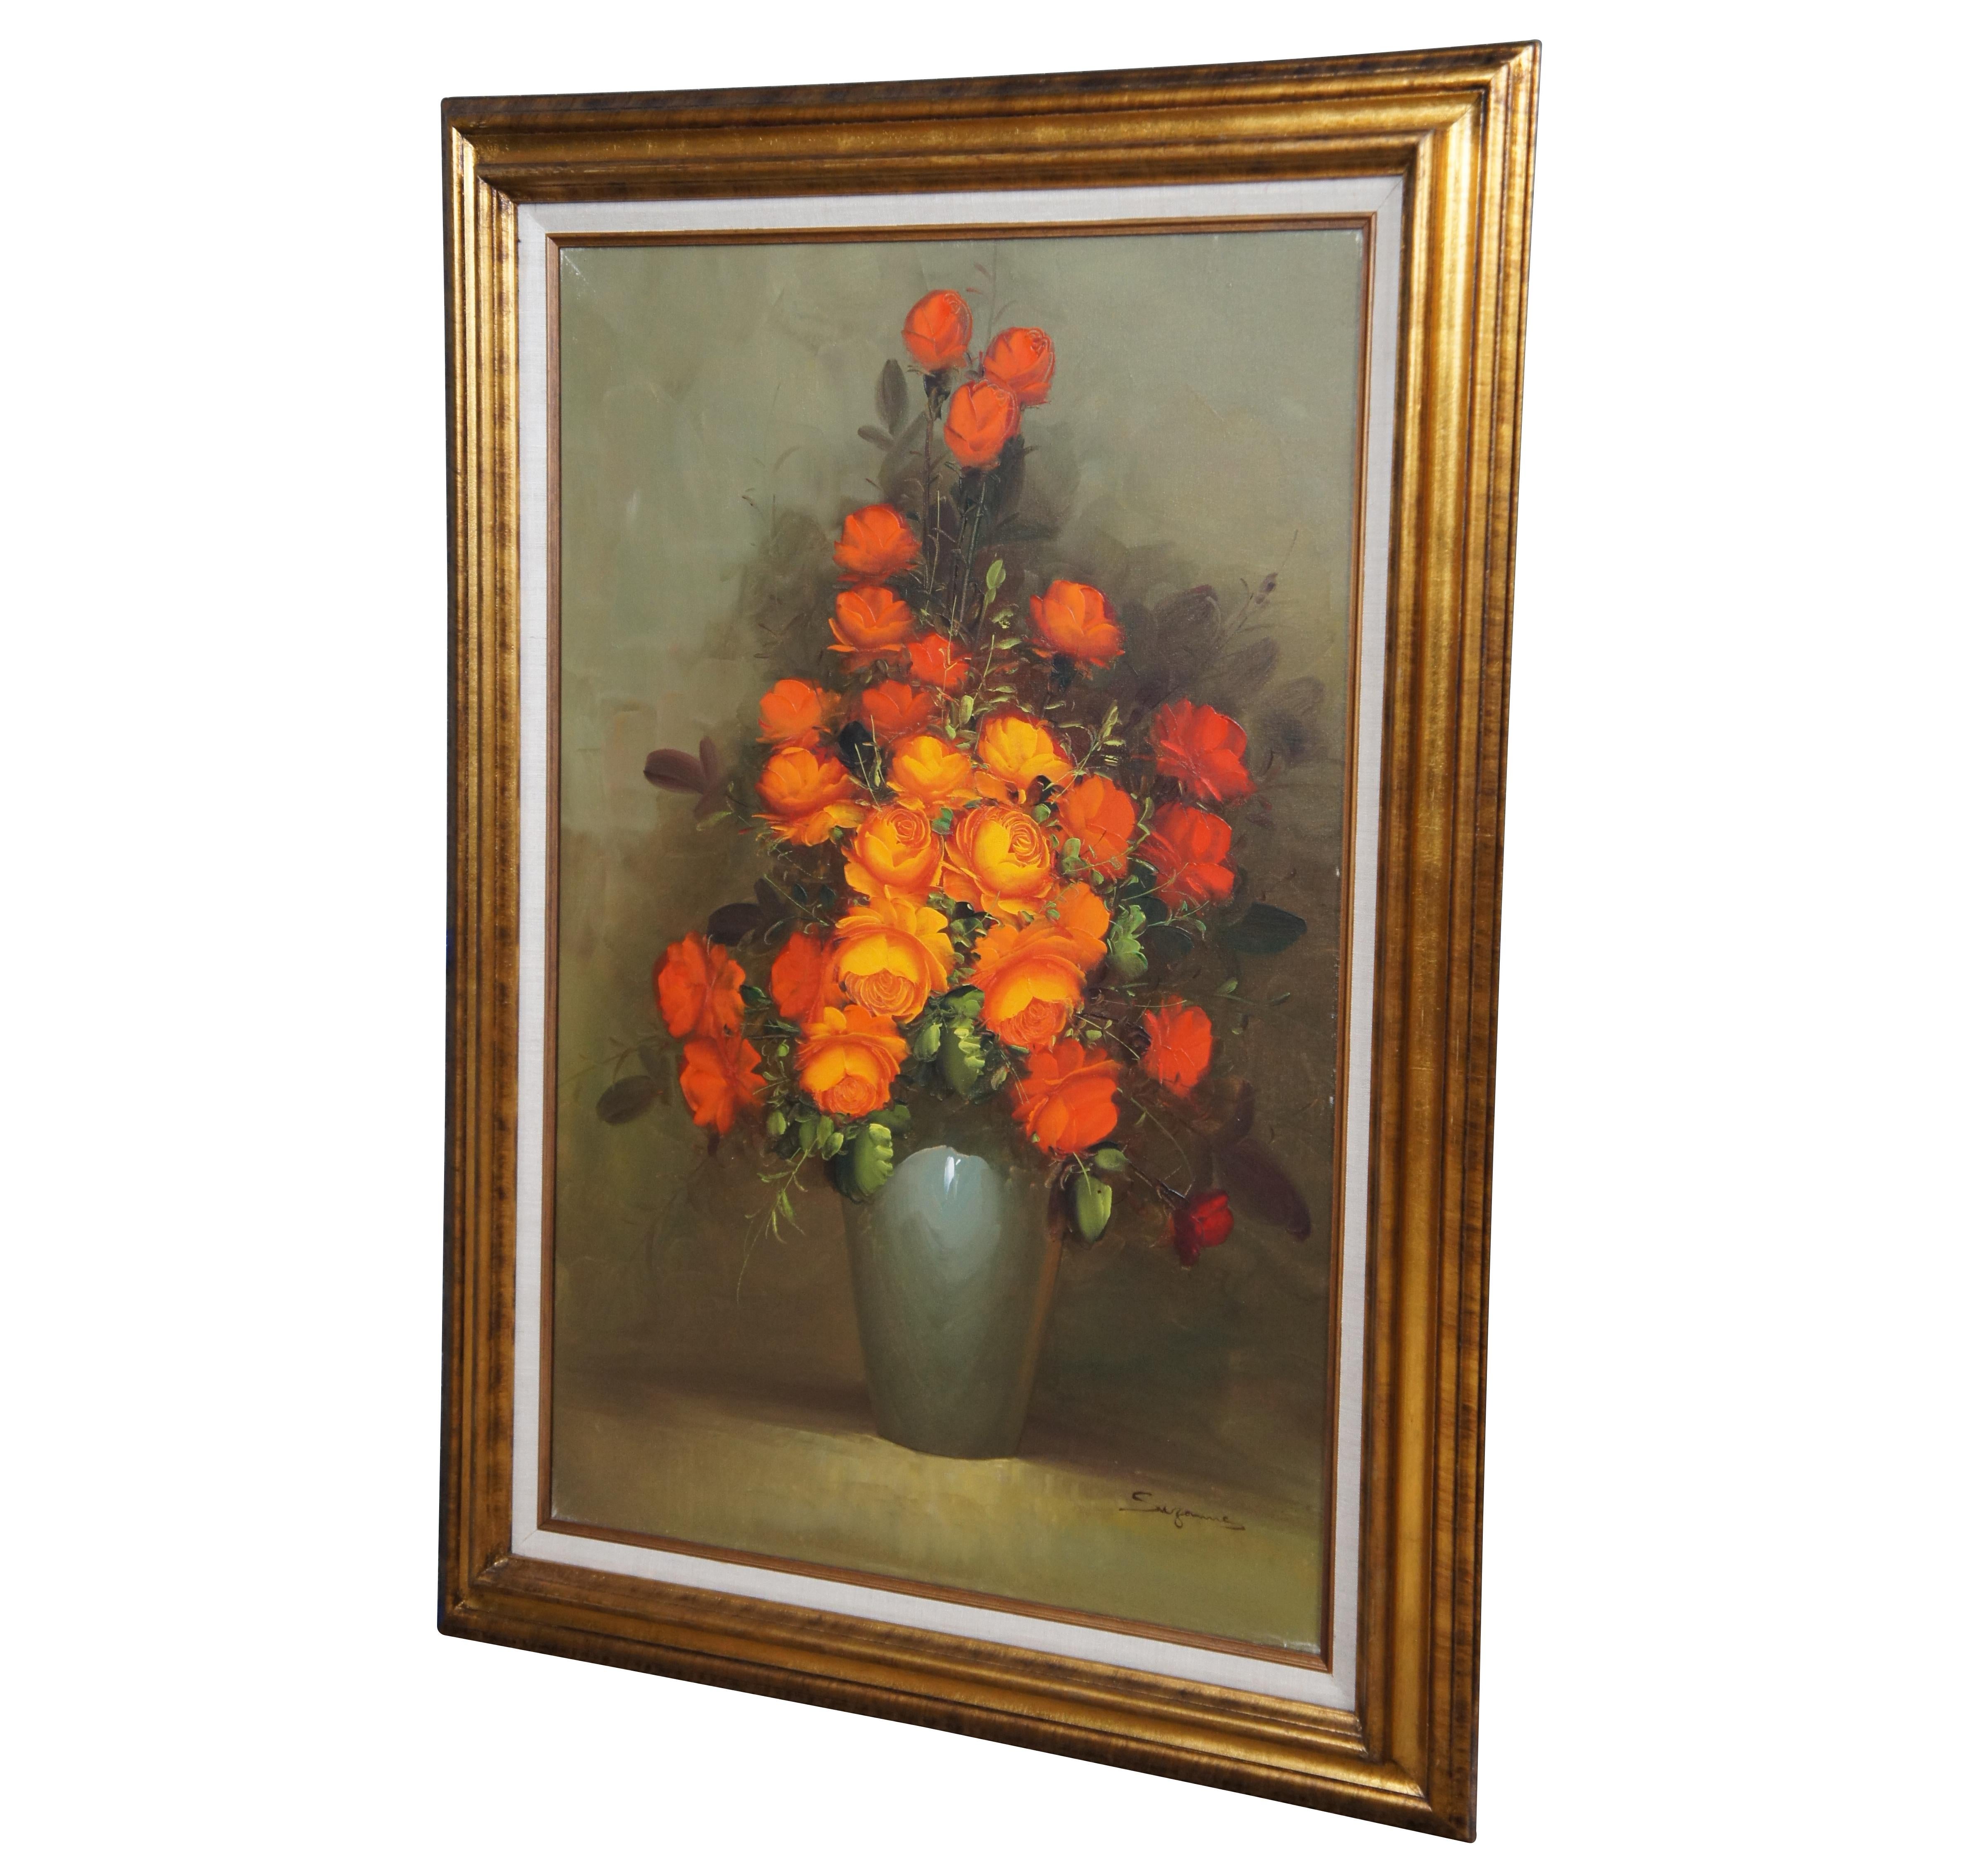 Vintage still life oil painting on canvas of a bouquet of orange roses in a light blue vase. Signed by artist Suzanne in lower left.

Dimensions

32” x 1.5” x 44” / Sans Frame – 24” x 36” (Width x Depth x Height).